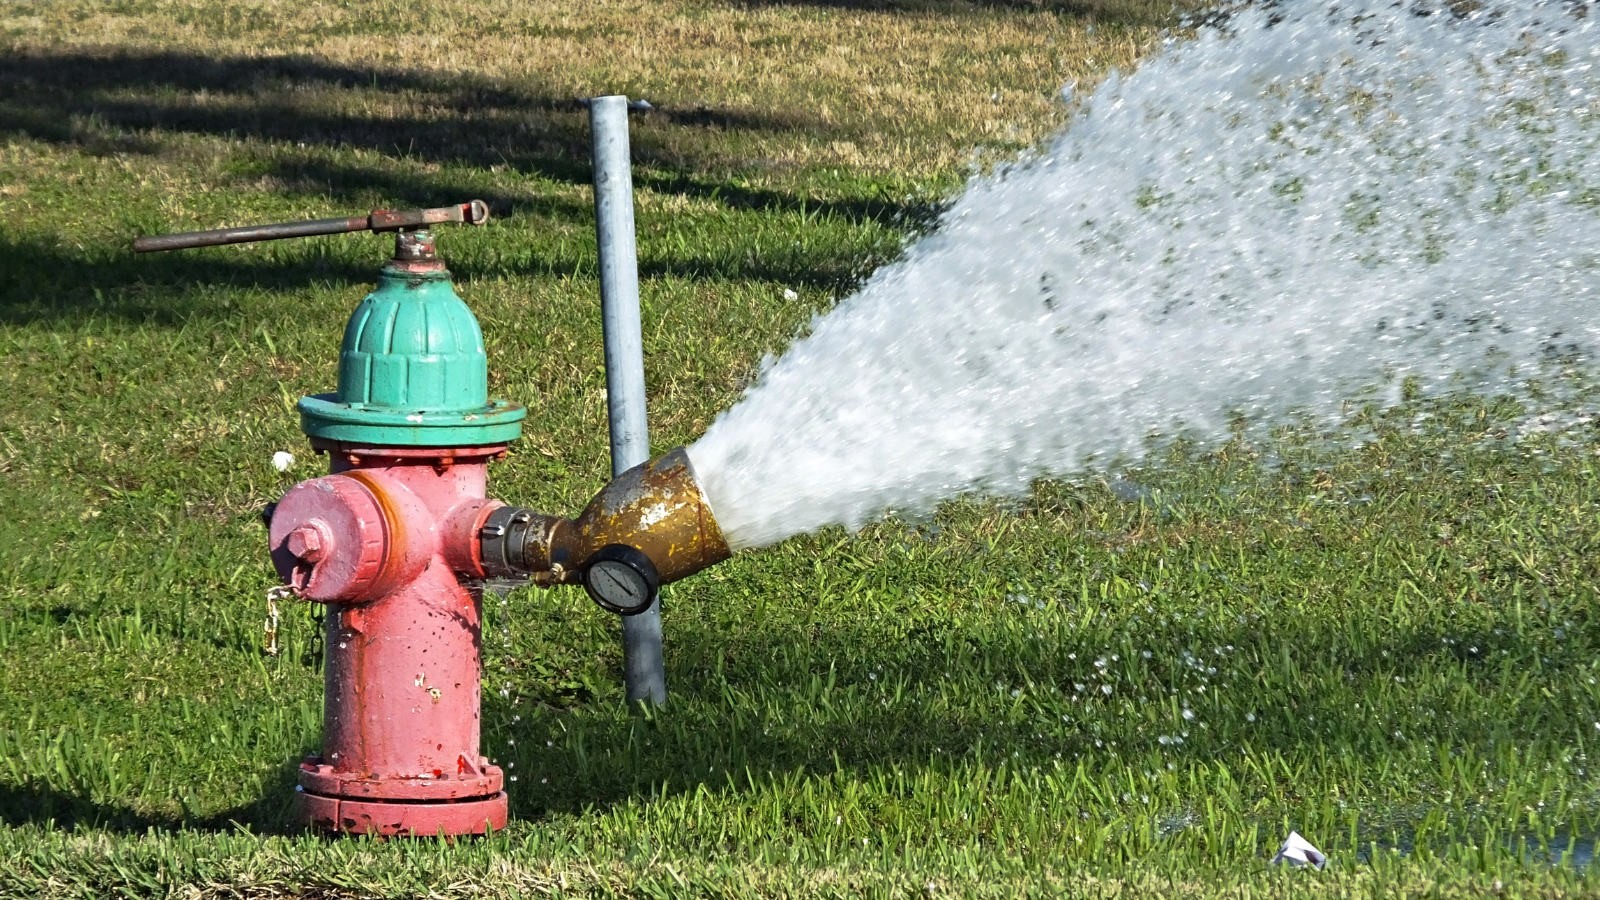 A red fire hydrant with water spraying out of the right side